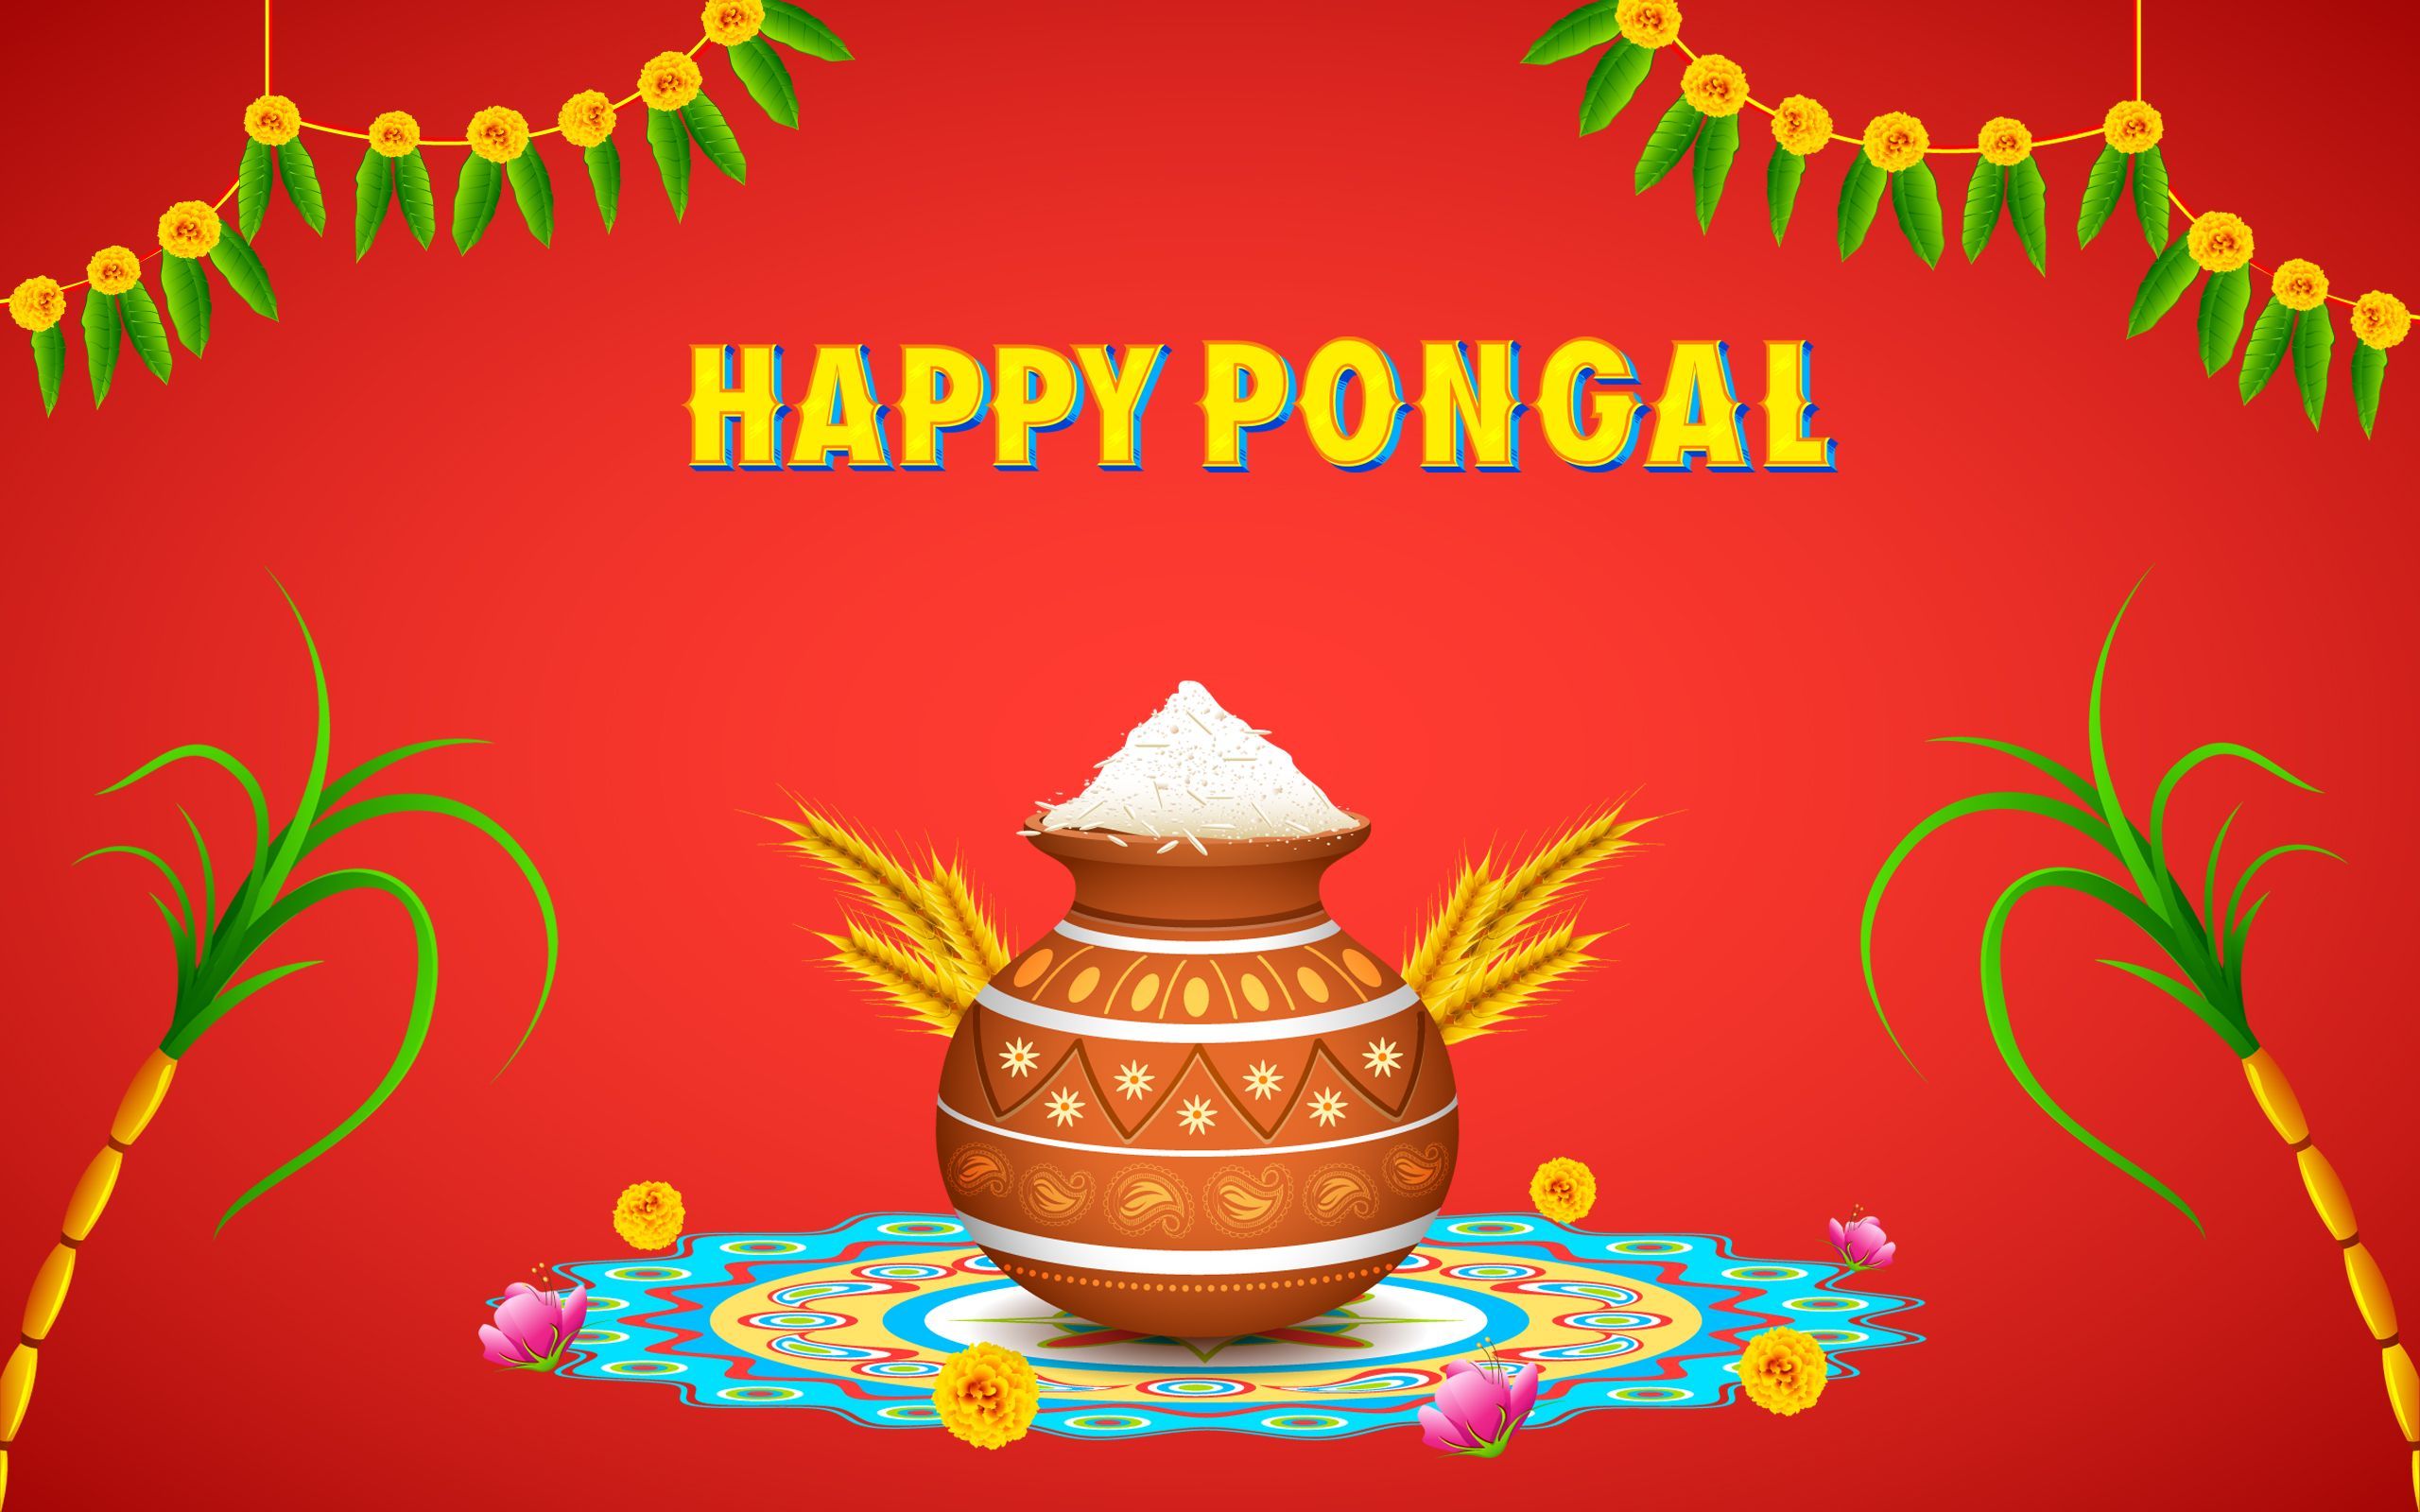 Happy Pongal Wallpaper Picture Image Free Download. Happy pongal, Pongal image, Easy drawings for kids